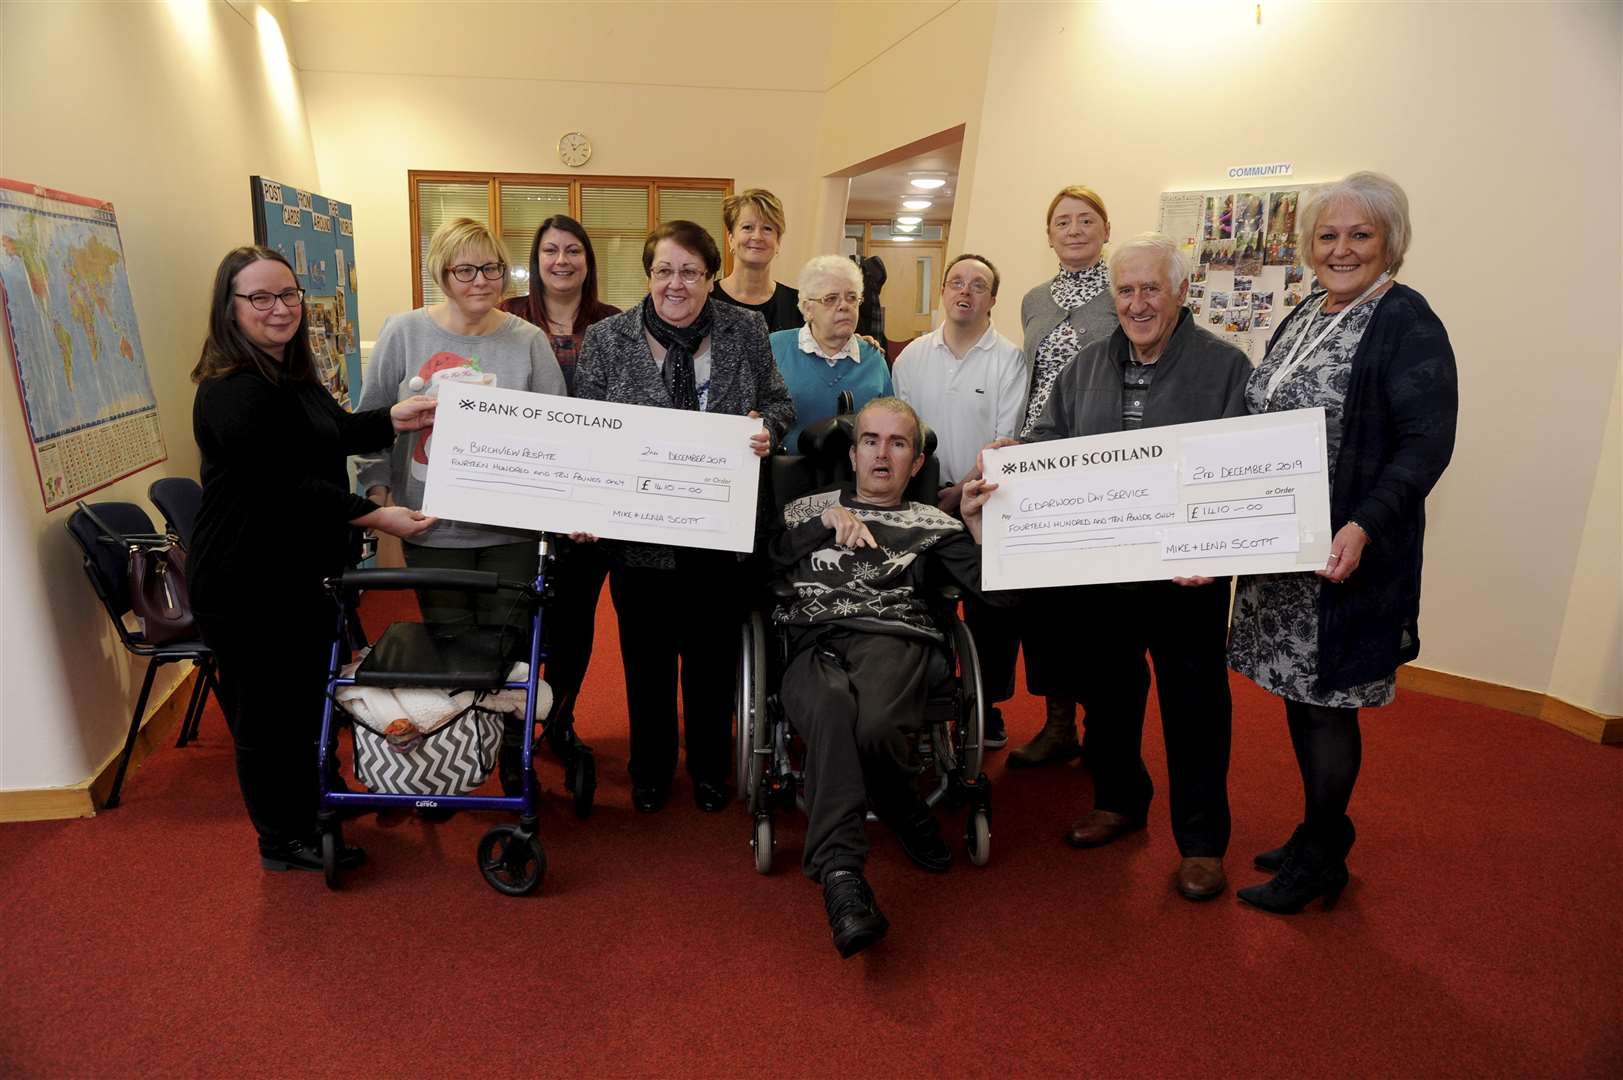 Lena and Mike Scott donated £2820 raised at their Golden Wedding Anniversary for Cedarwood and Birchview.